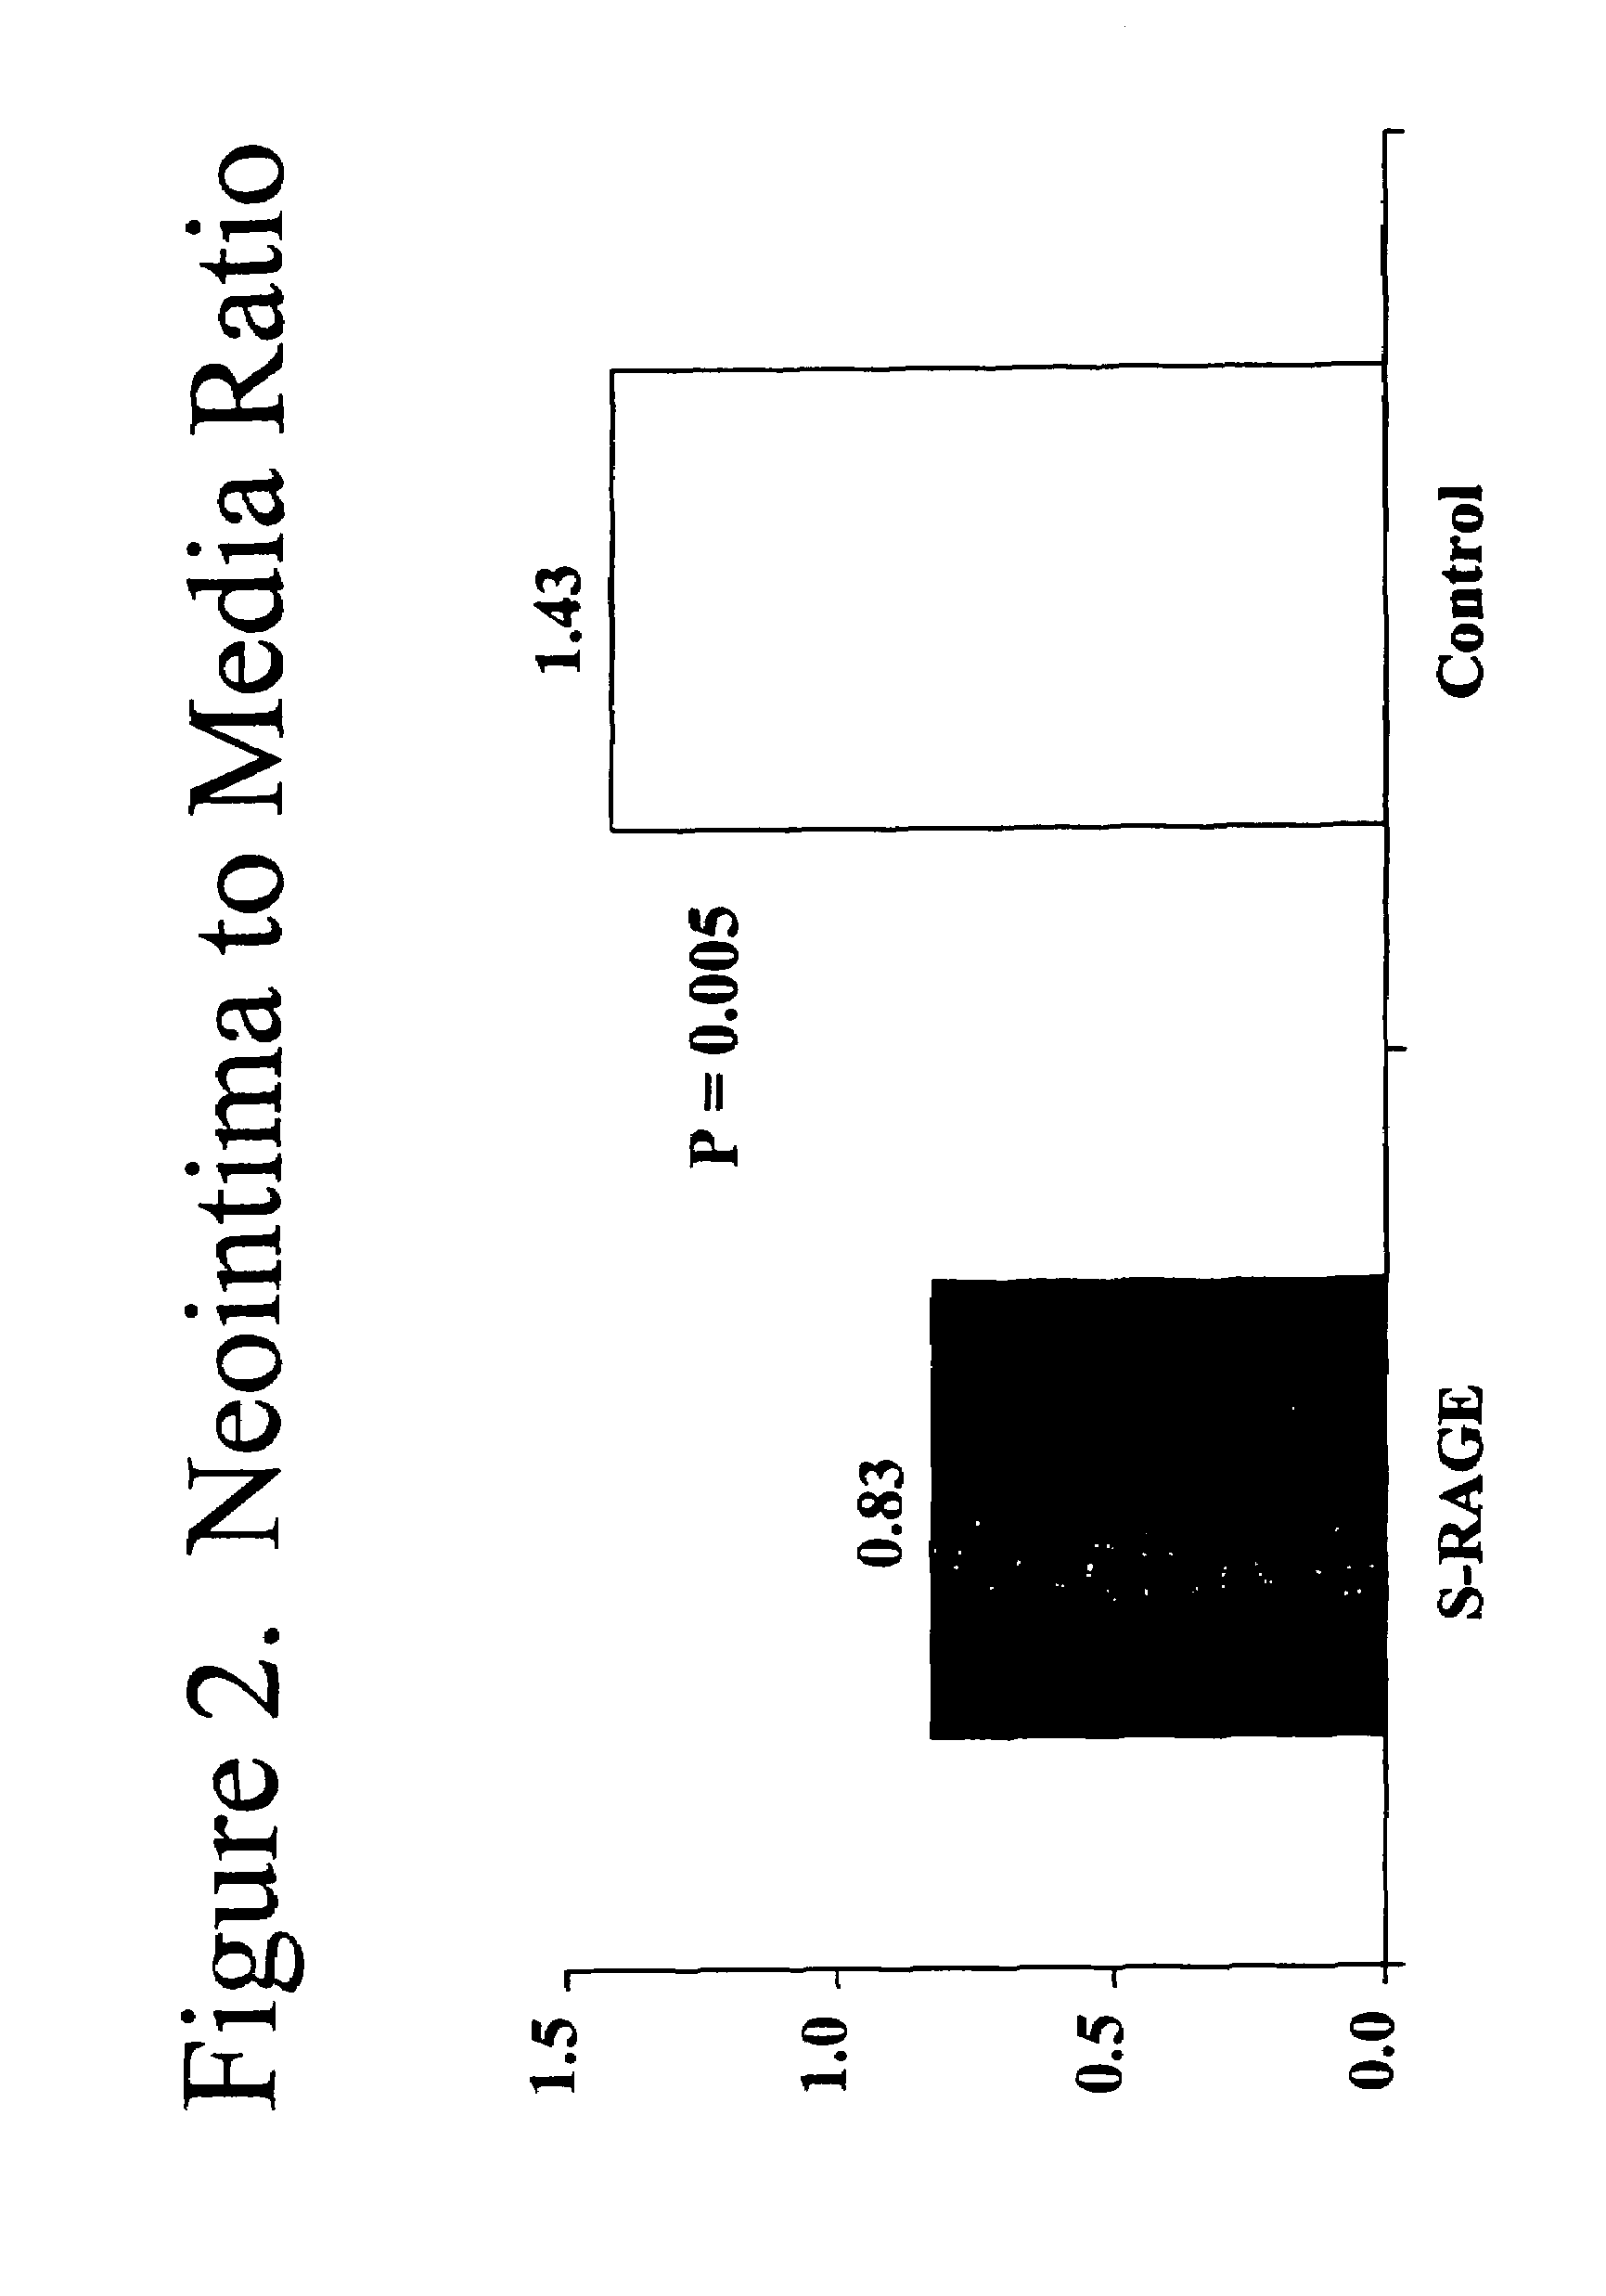 Method for inhibiting new tissue growth in blood vessels in a patient subjected to blood vessel injury